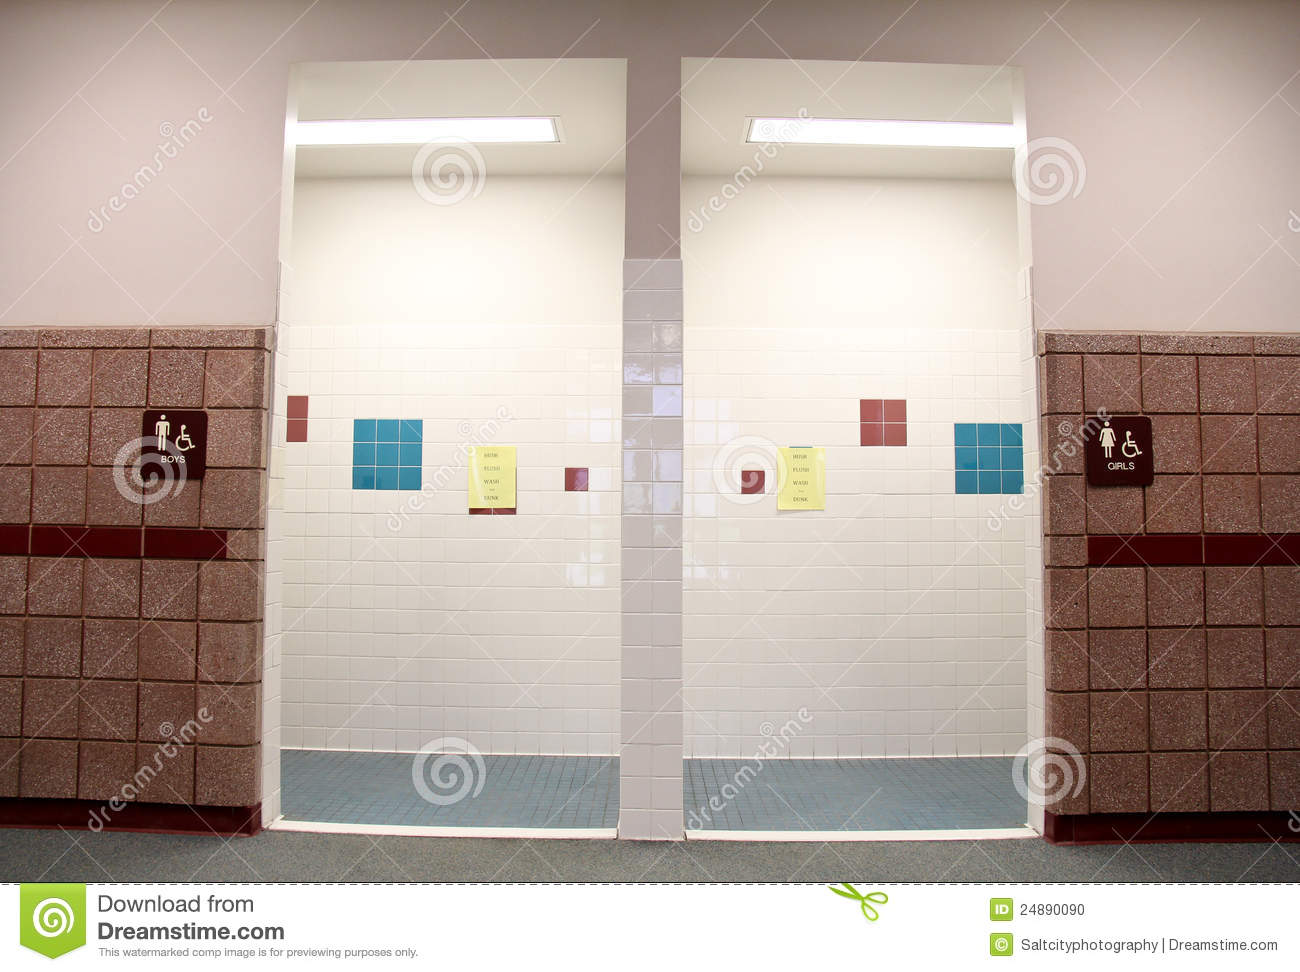 Image Of The Boys And Girls Restrooms In An Elementary School 